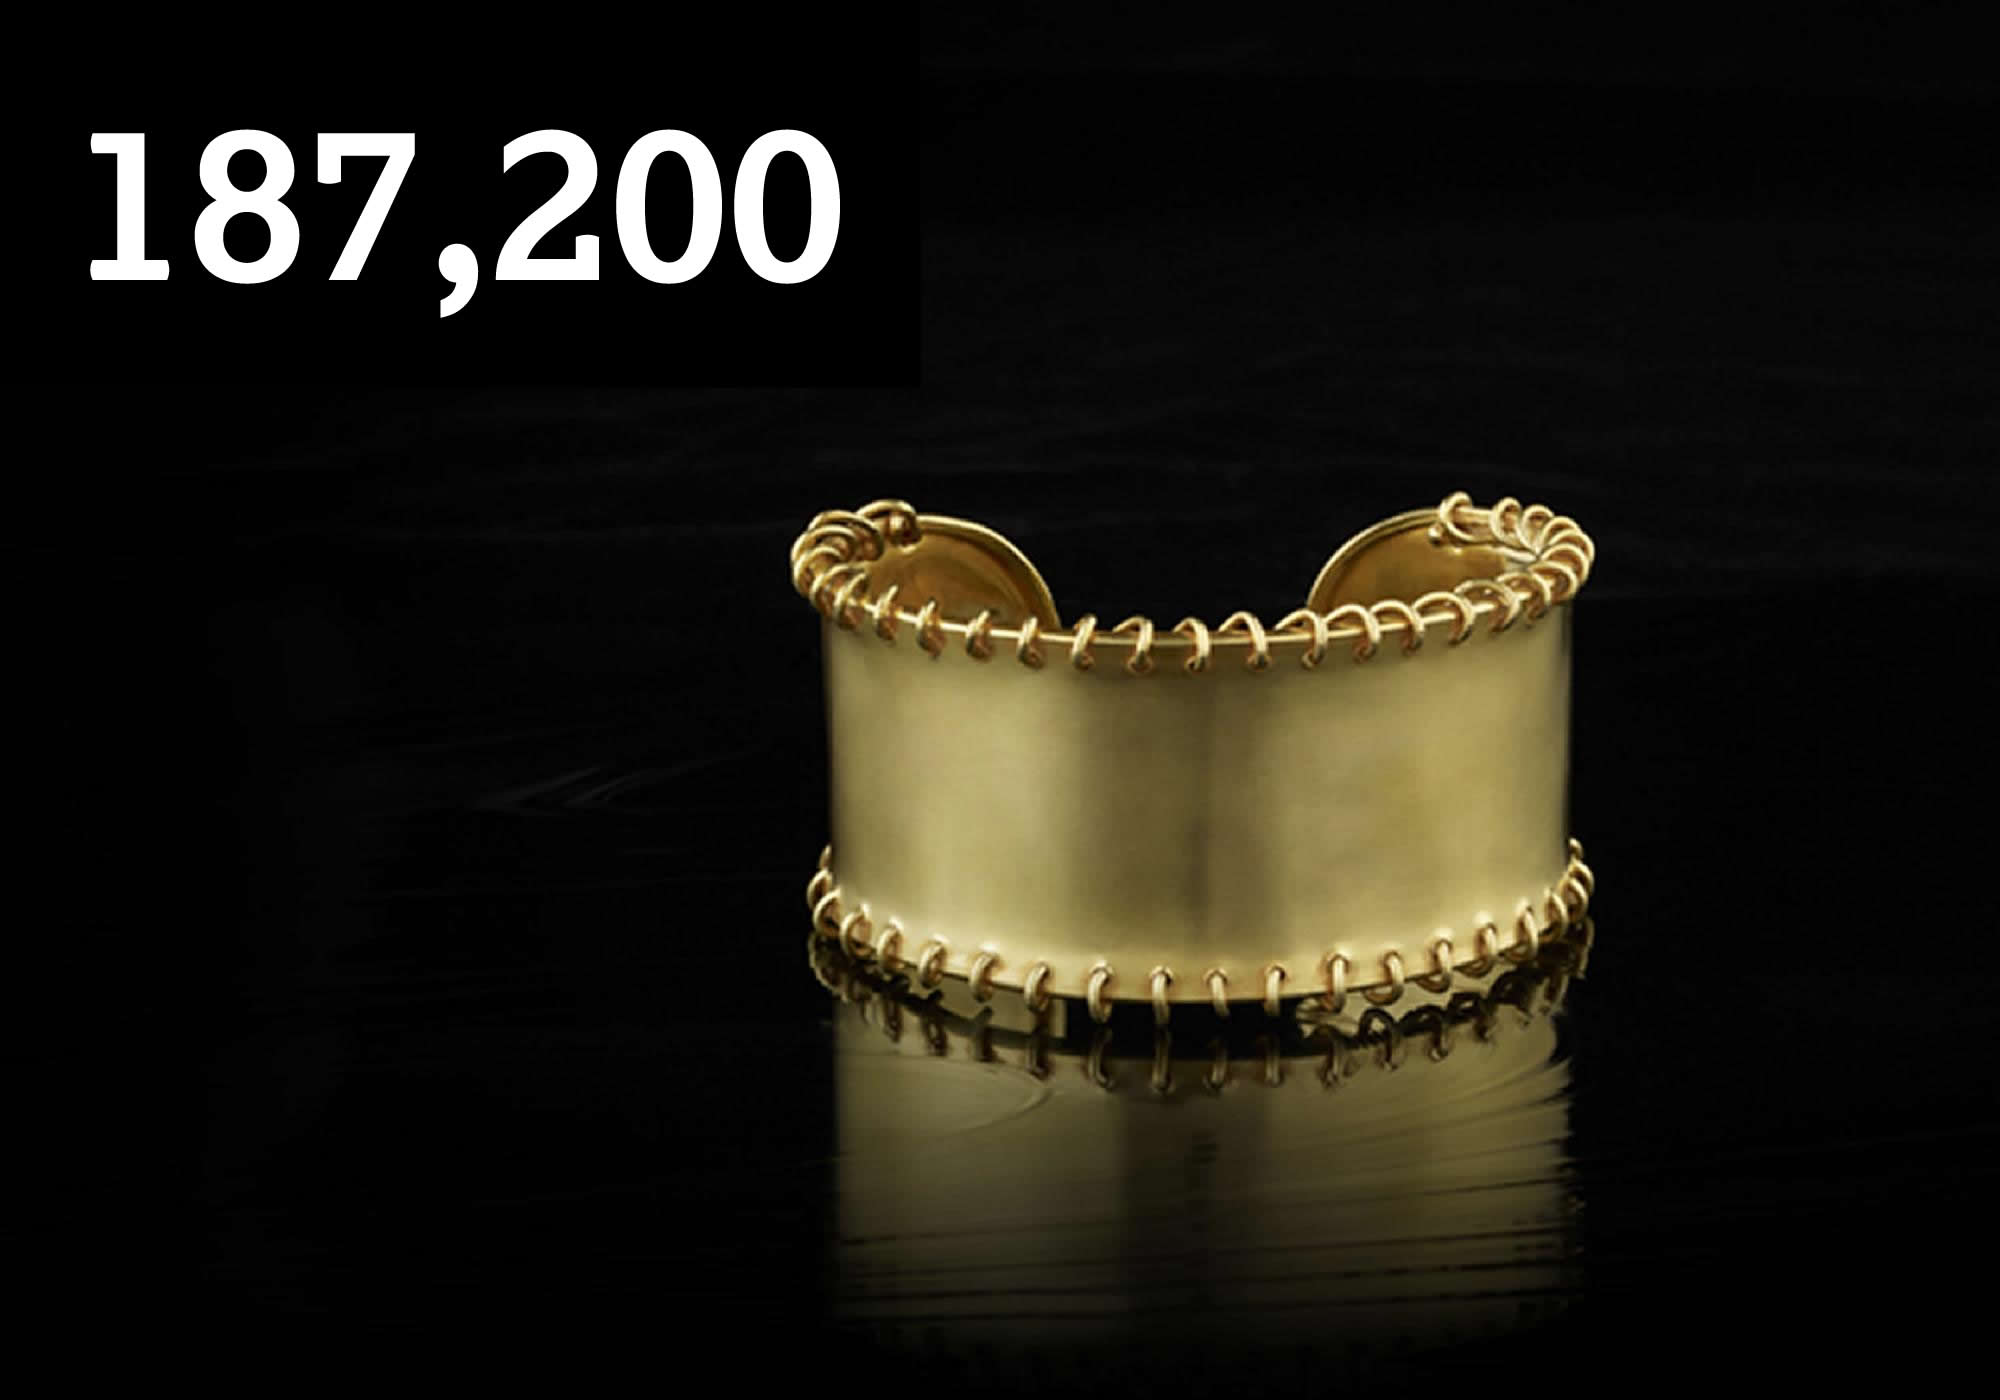 187,200 tonnes – Around 187,200 tonnes of gold has been mined since the beginning of civilisation. image